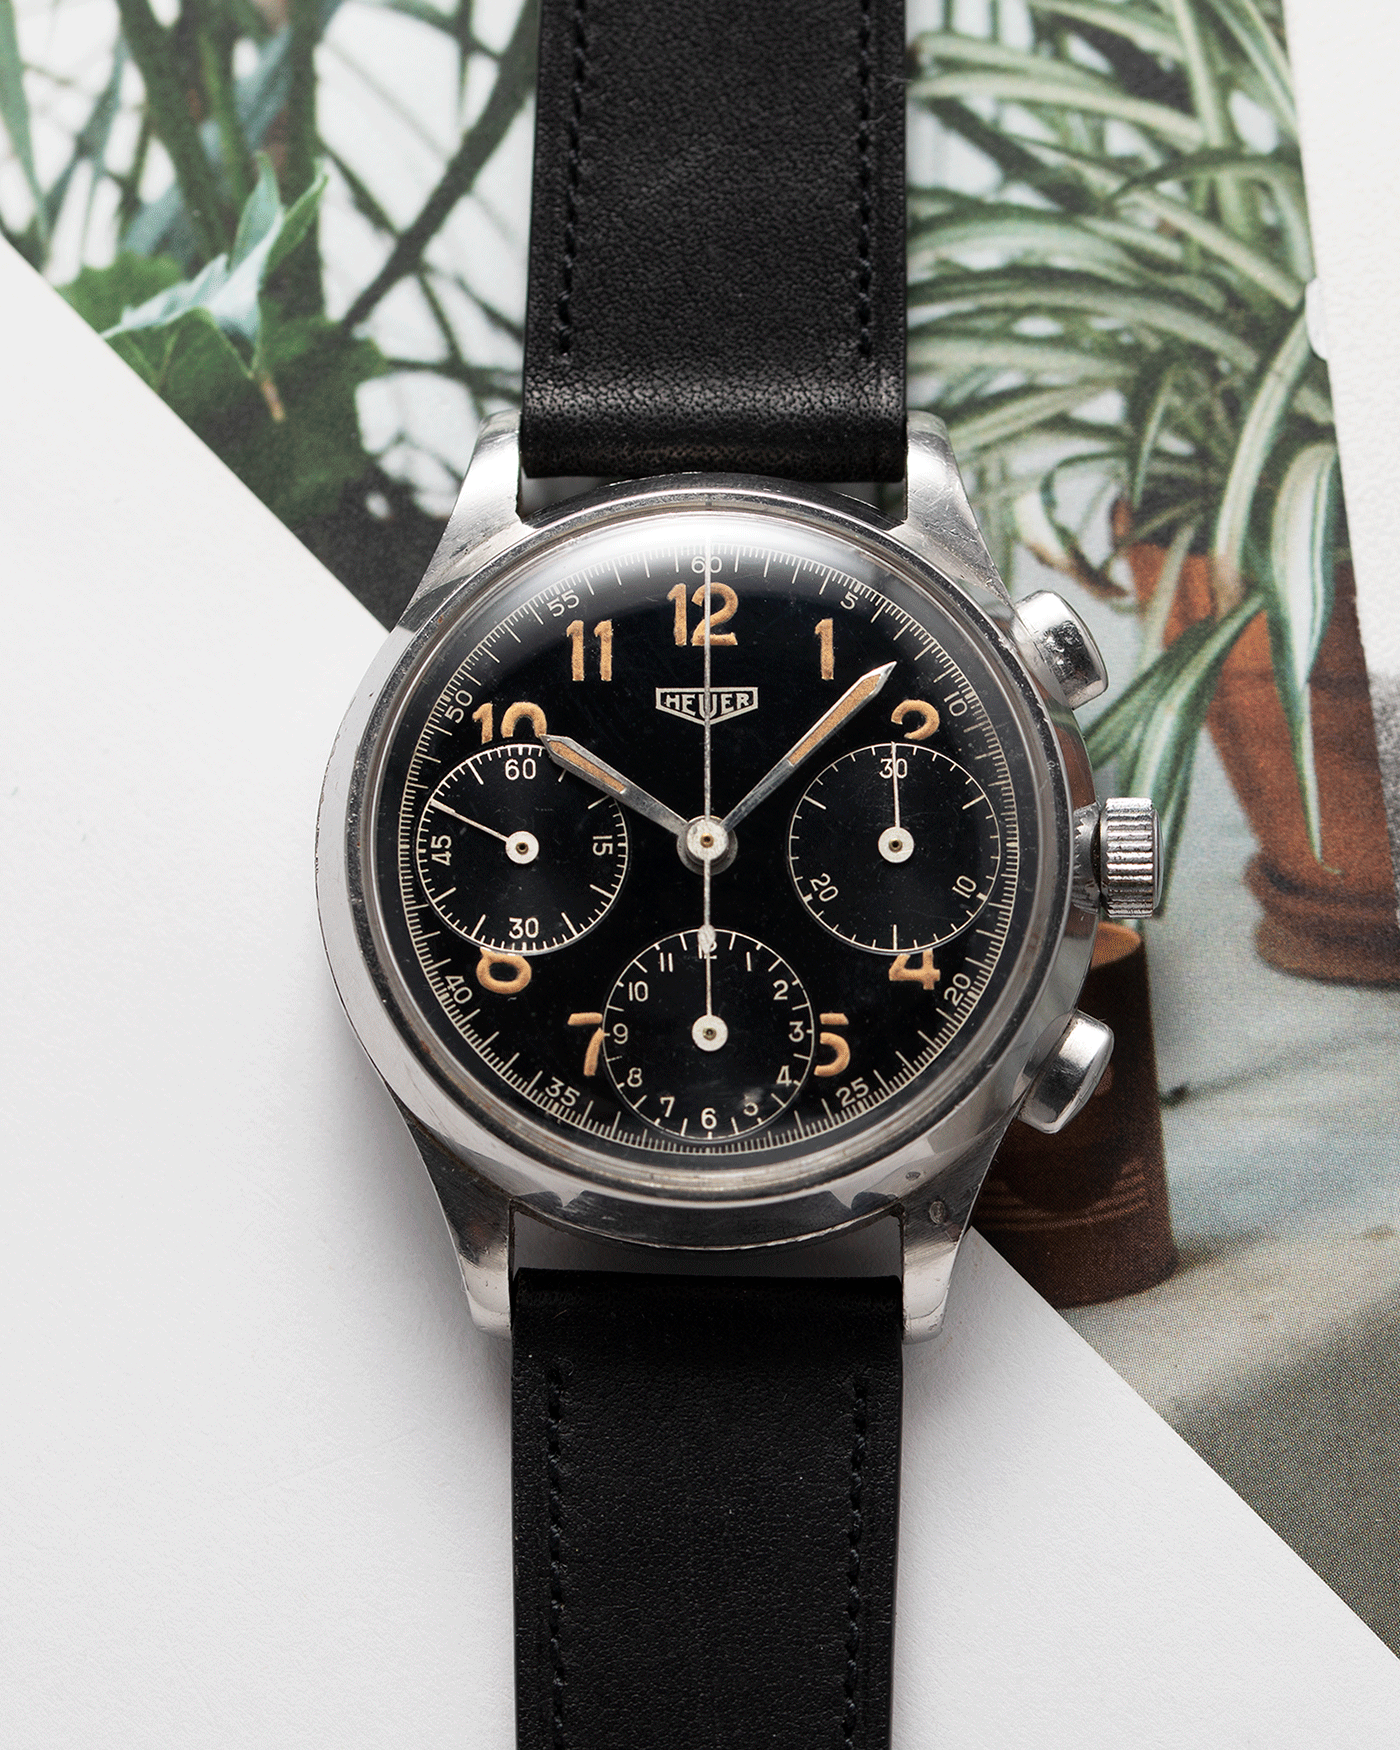 Brand: Heuer Year: 1940’s Reference Number: 345 Material: Stainless Steel Movement: Valjoux 71 Case Diameter: 36mm Lug Width: 18mm Bracelet/Strap: Nostime Black Calf